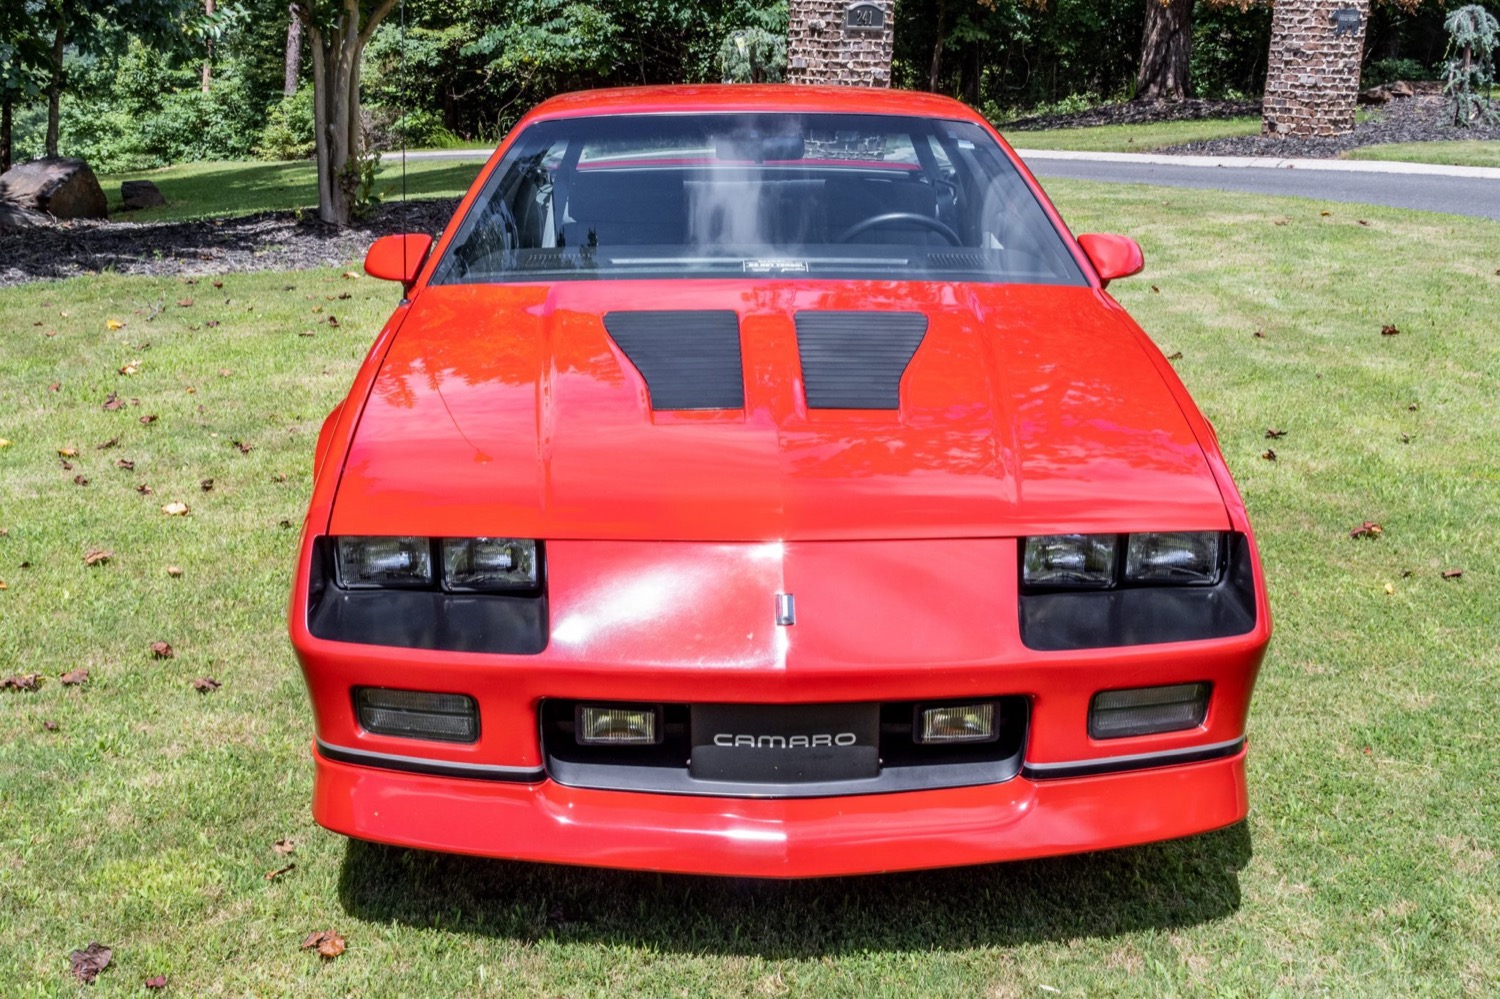 Chevy Camaro Z28 IROC-Z With Less Than 2K Miles Up For Grabs